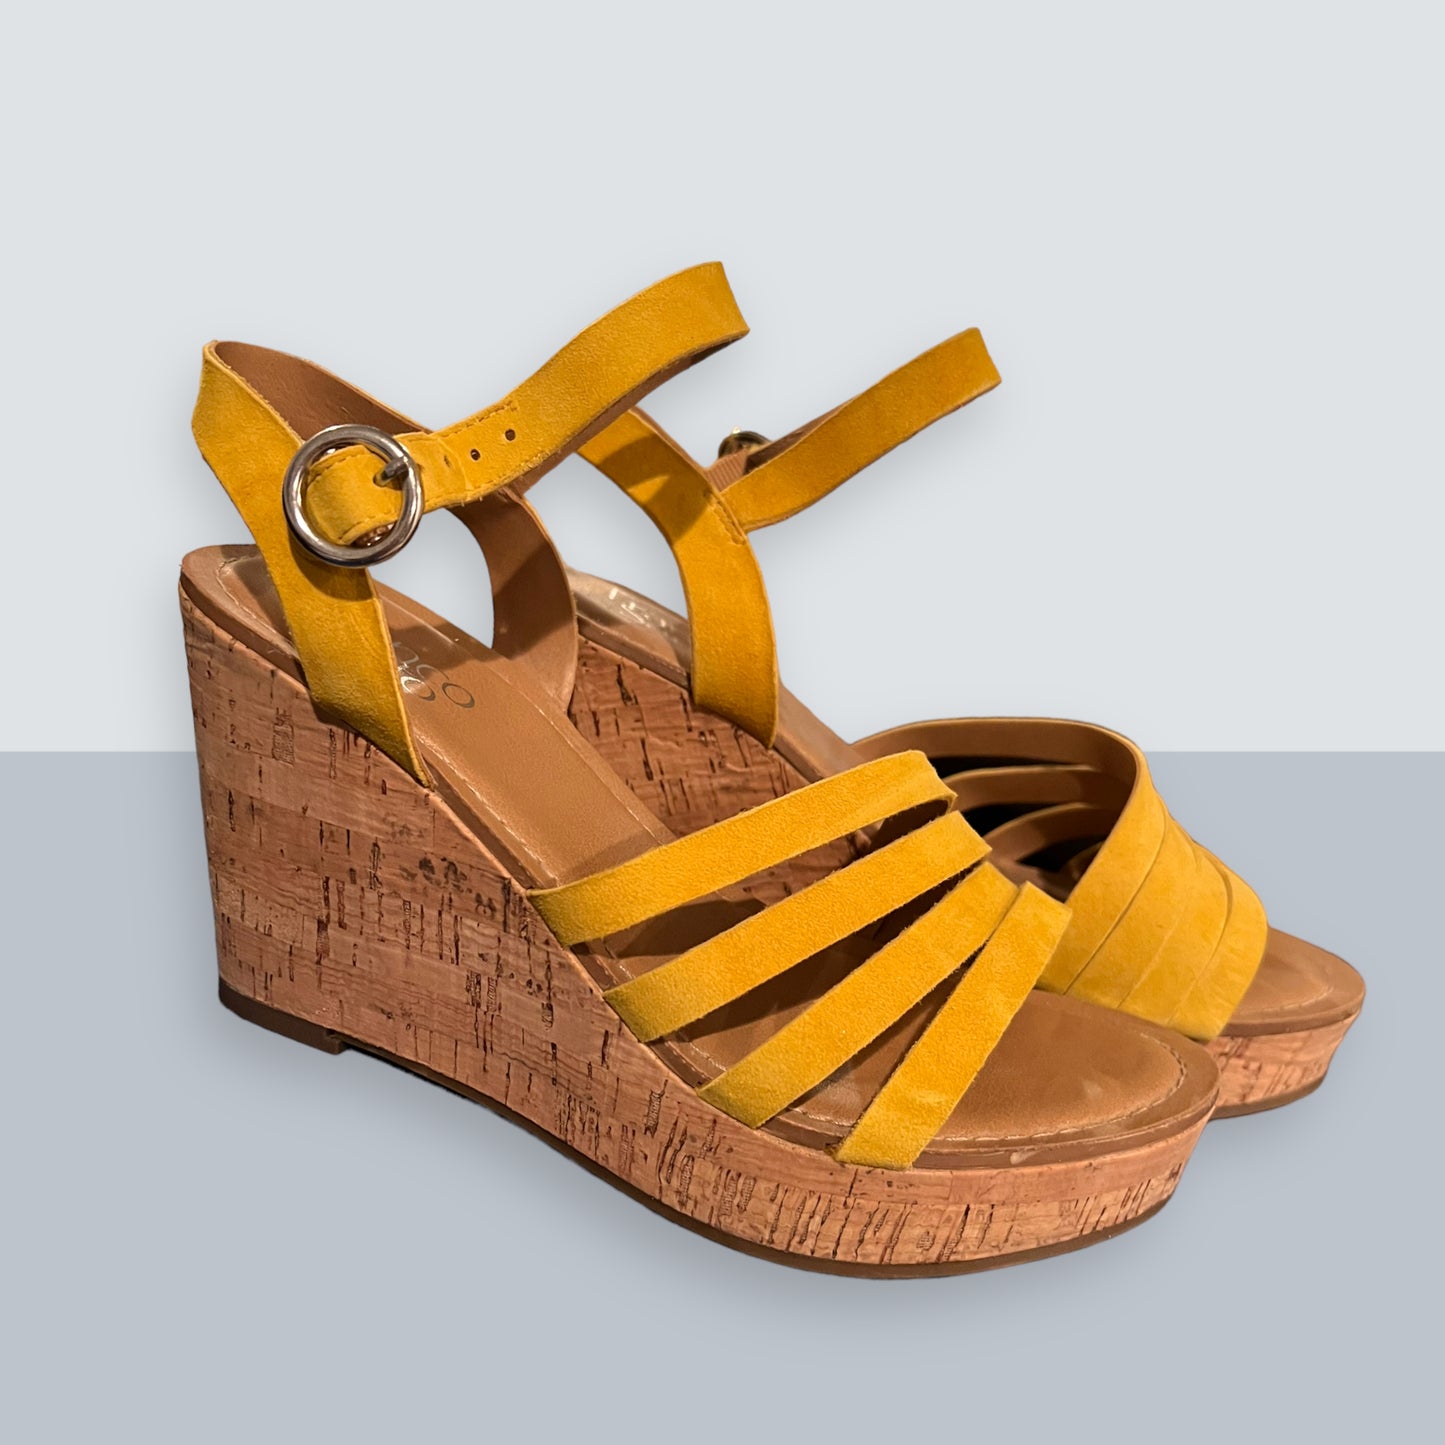 Women's Shoes - Size 7.5 - Yellow Wedges